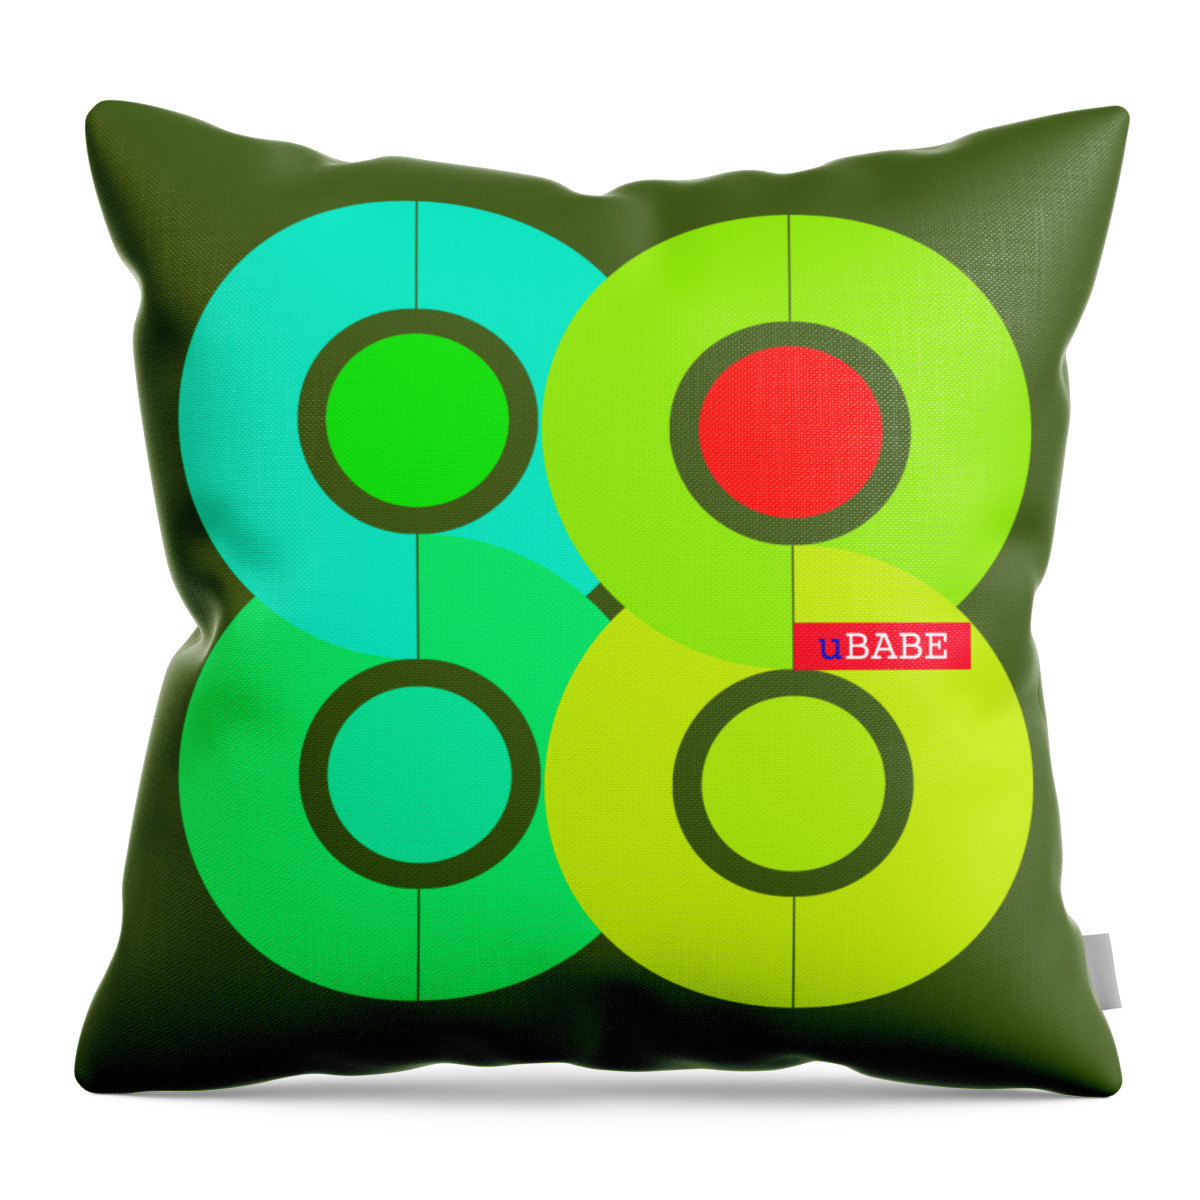 Ubabe Green Style Throw Pillow featuring the digital art Green Style by Ubabe Style